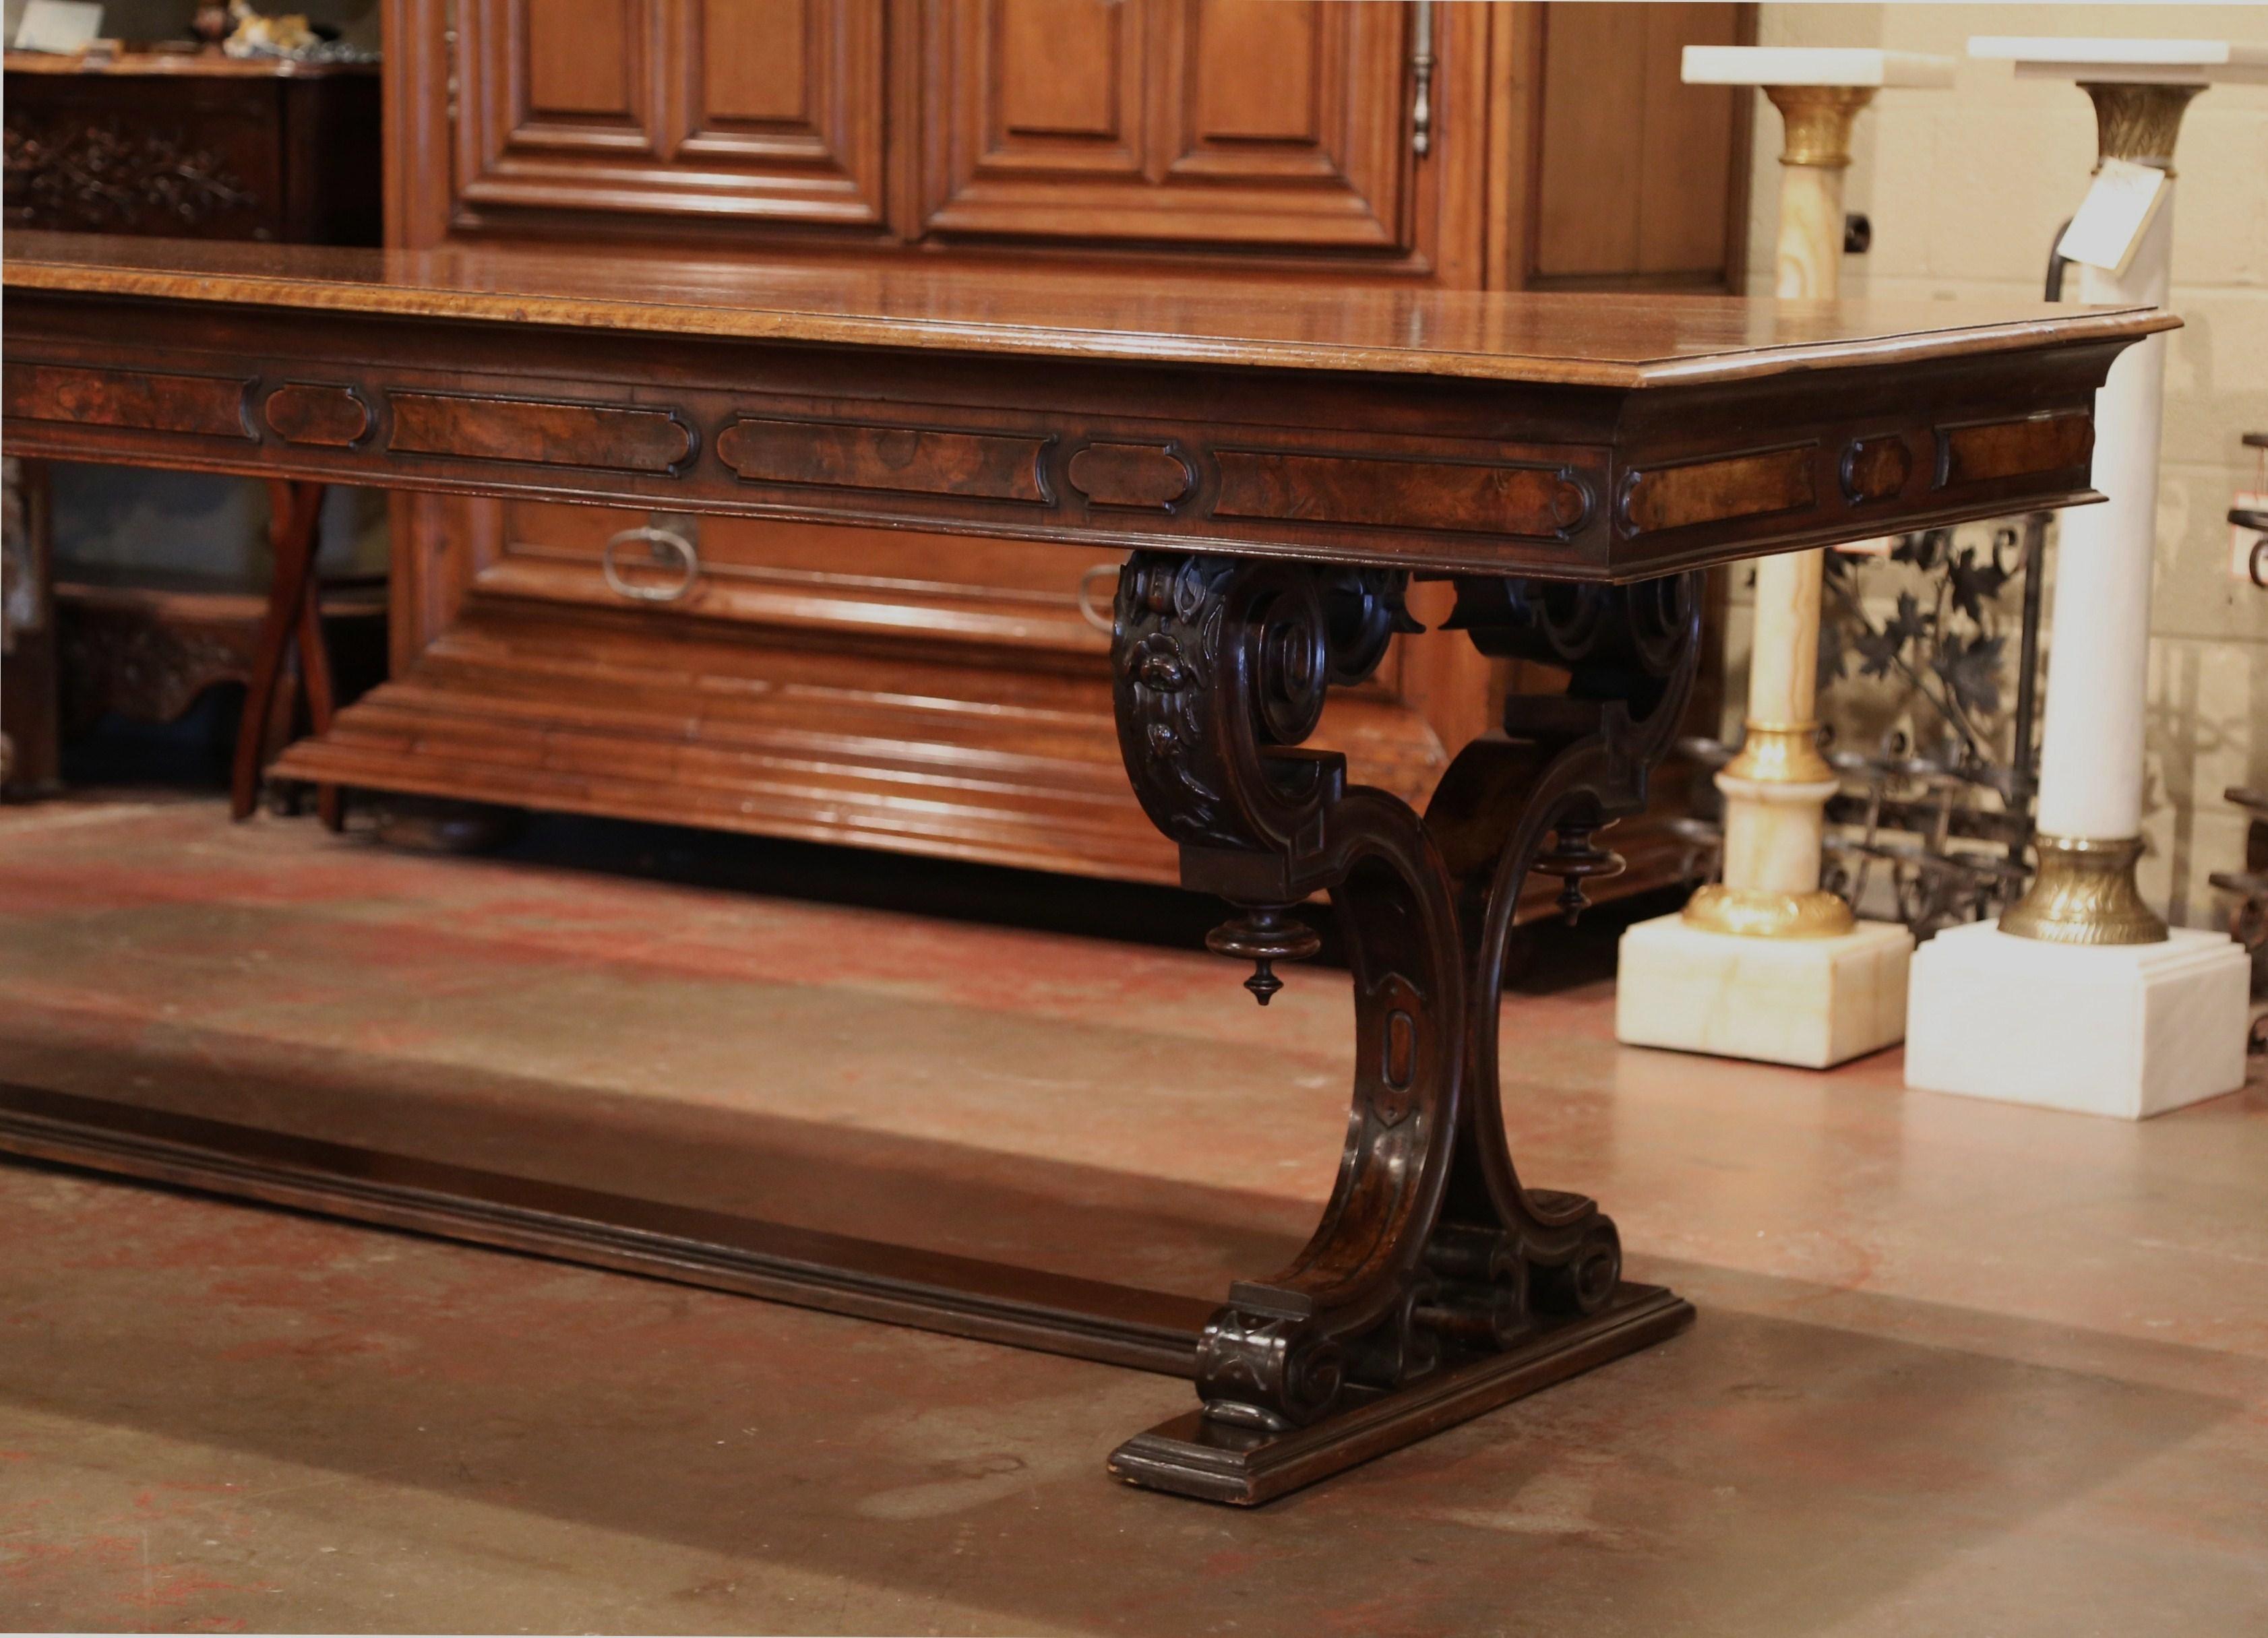 Bring the Italian elegance in your dining room with this important, antique farm table. Crafted in Italy circa 1850, the impressive, fruitwood table stands on two carved pedestal legs that are embellished with a lyre, decorative finial and foliage